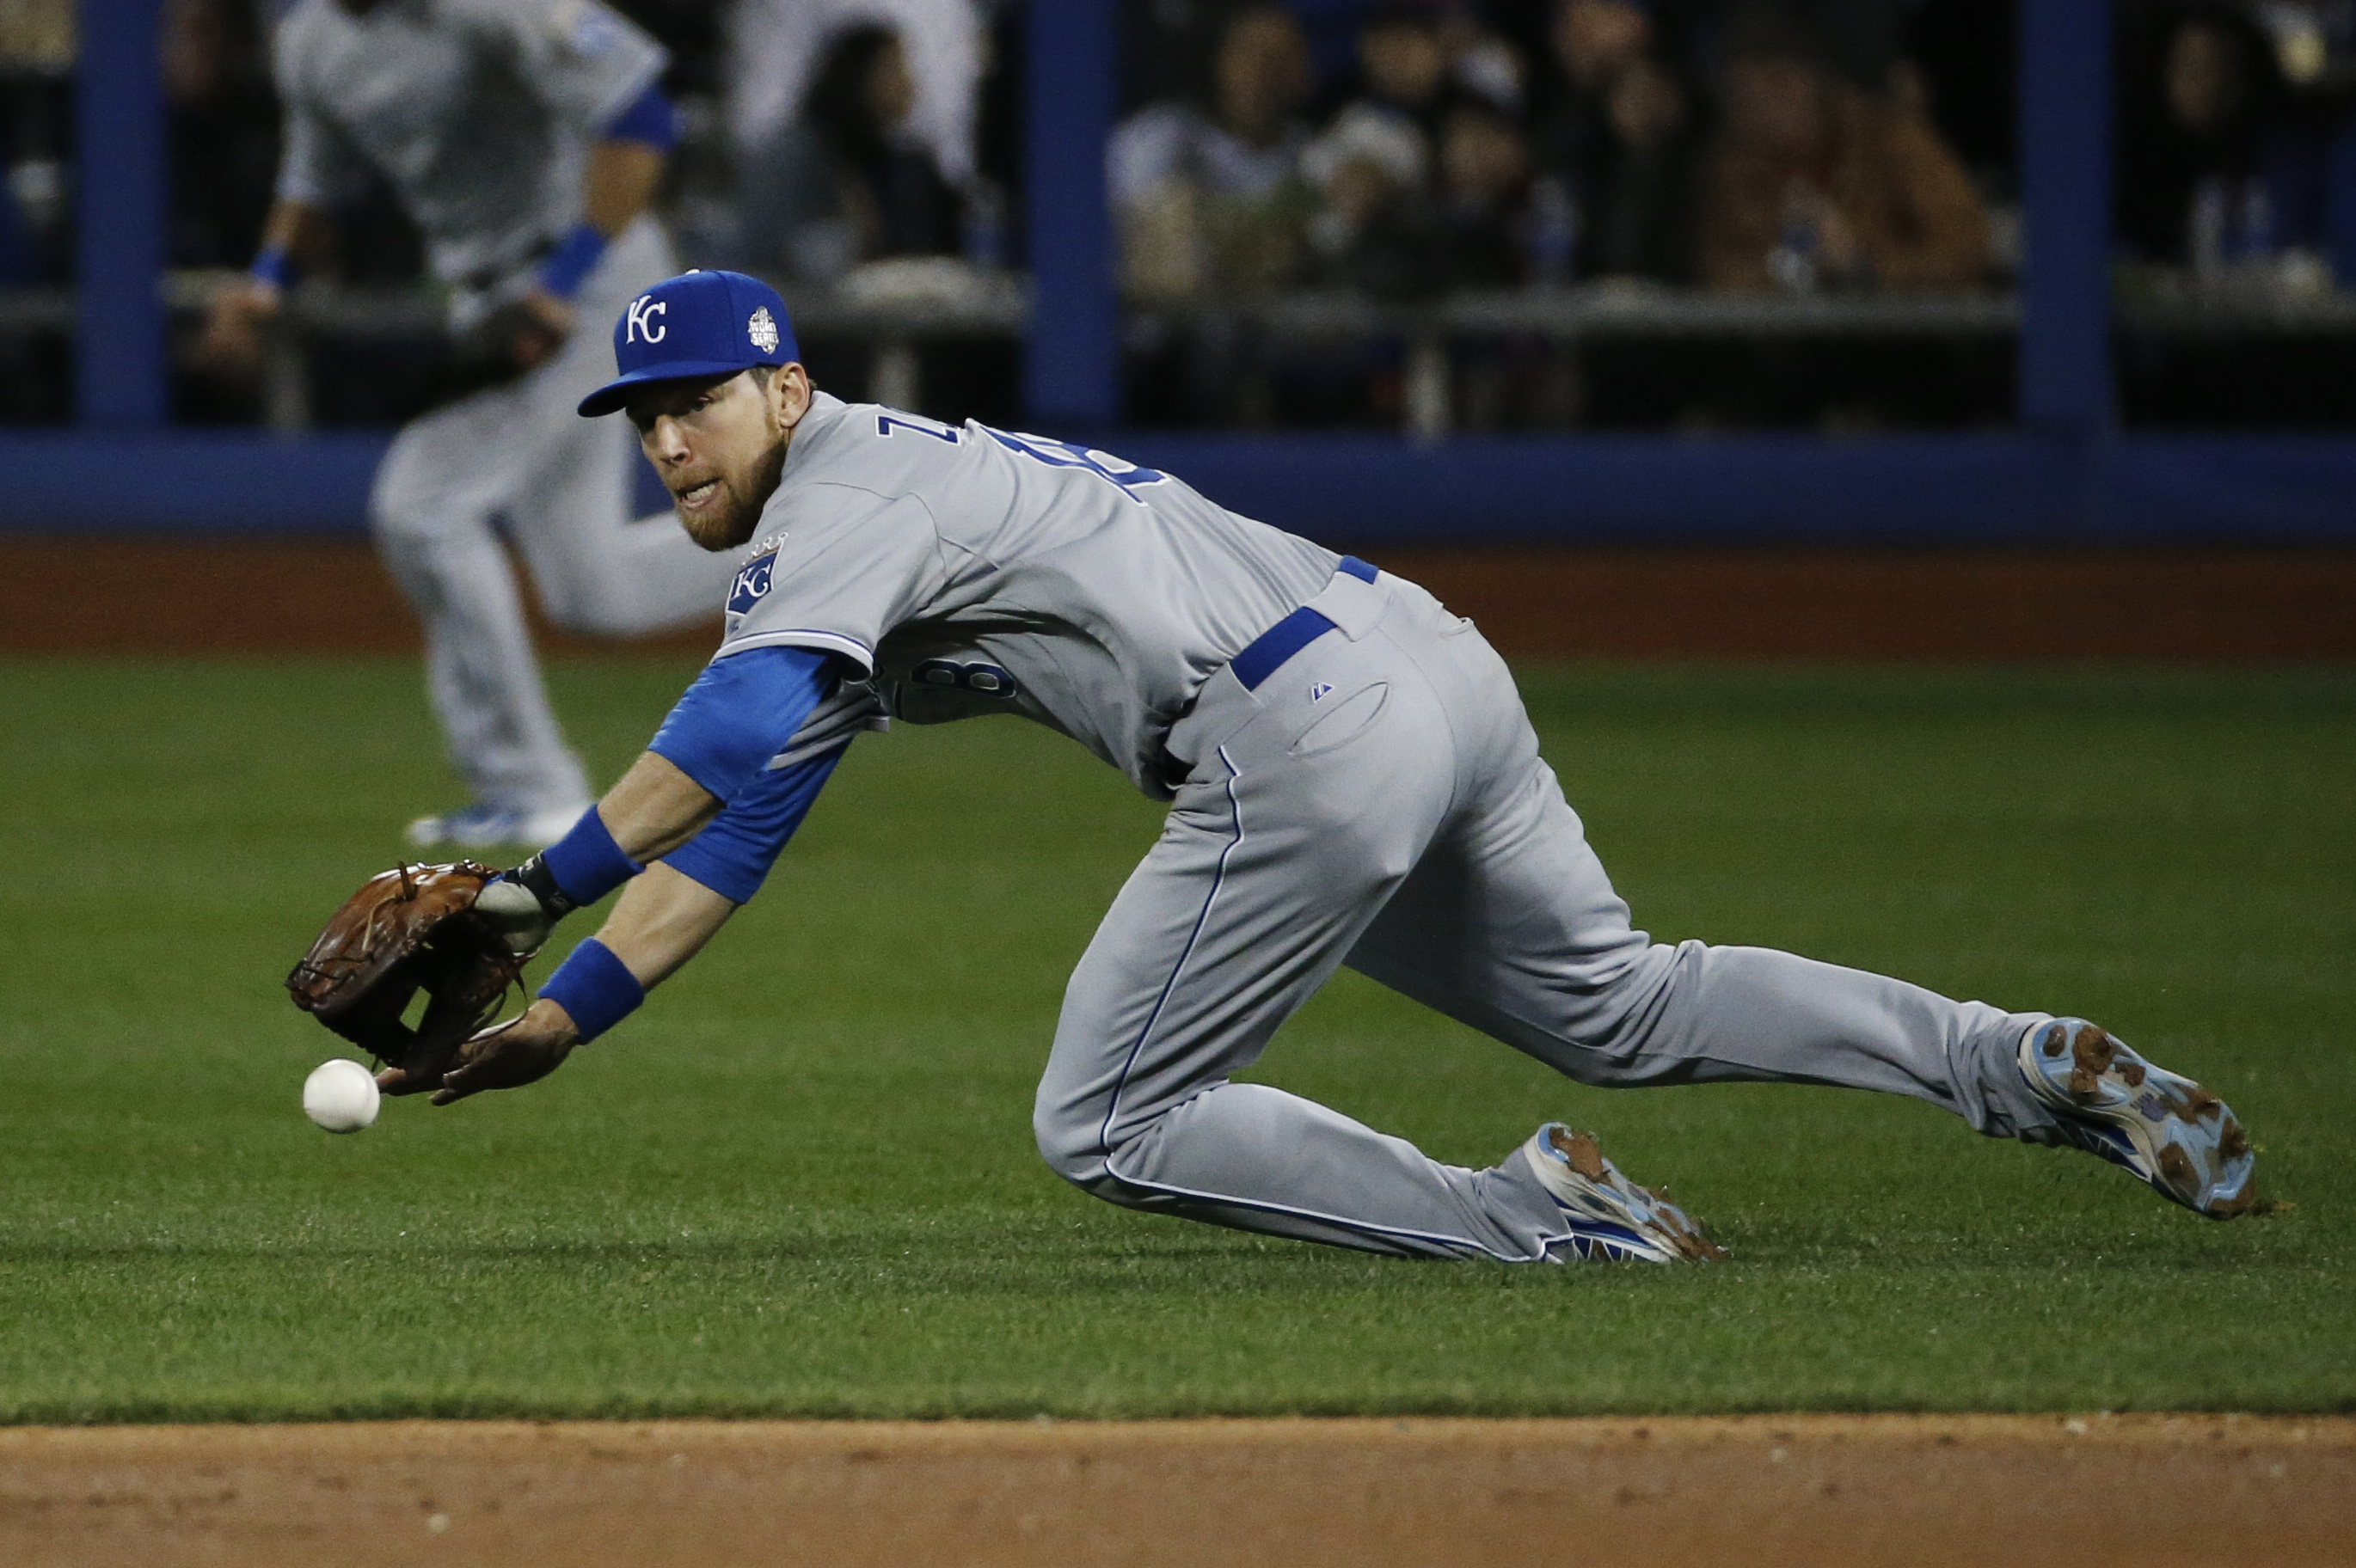 Among Cubs' young guns, Ben Zobrist is old reliable during World